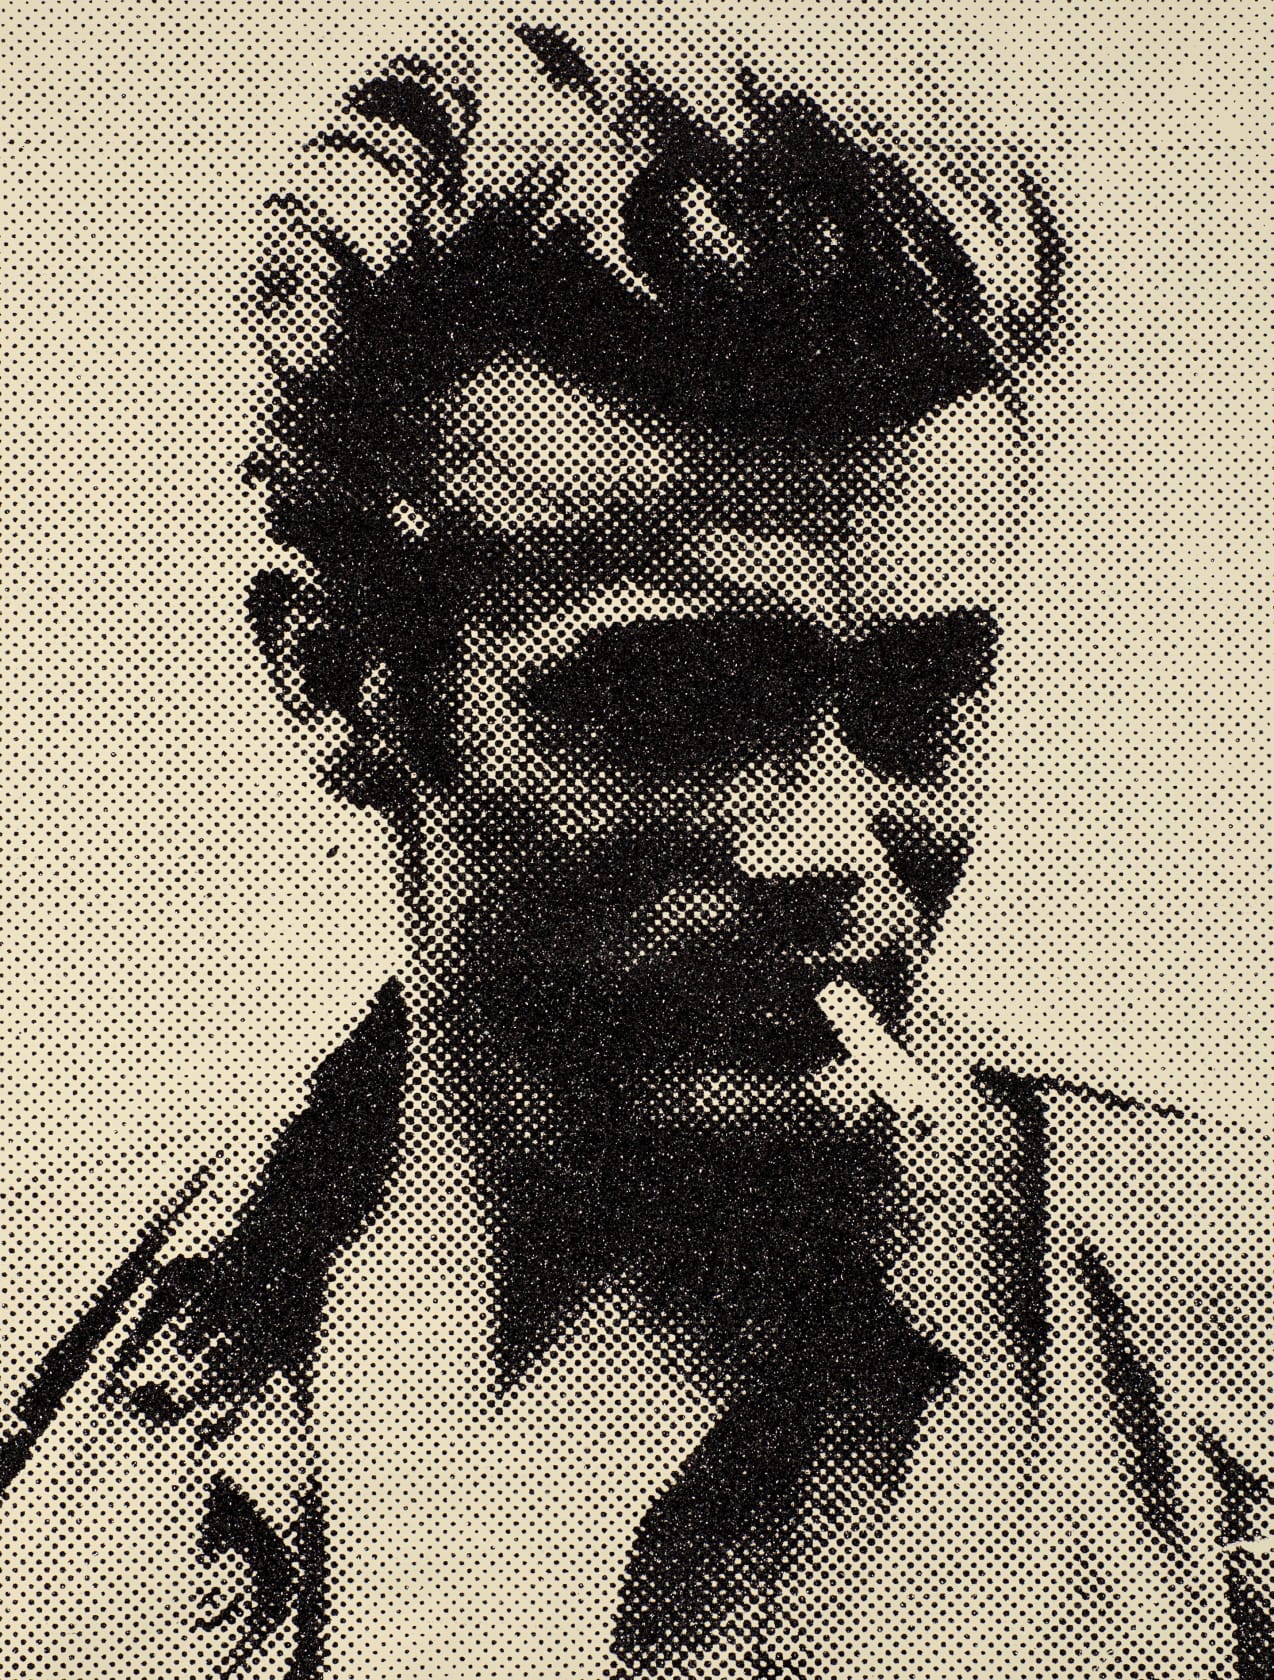 Russell Young James Dean - B&W Acrylic paint, enamel and diamond dust screen print on linen